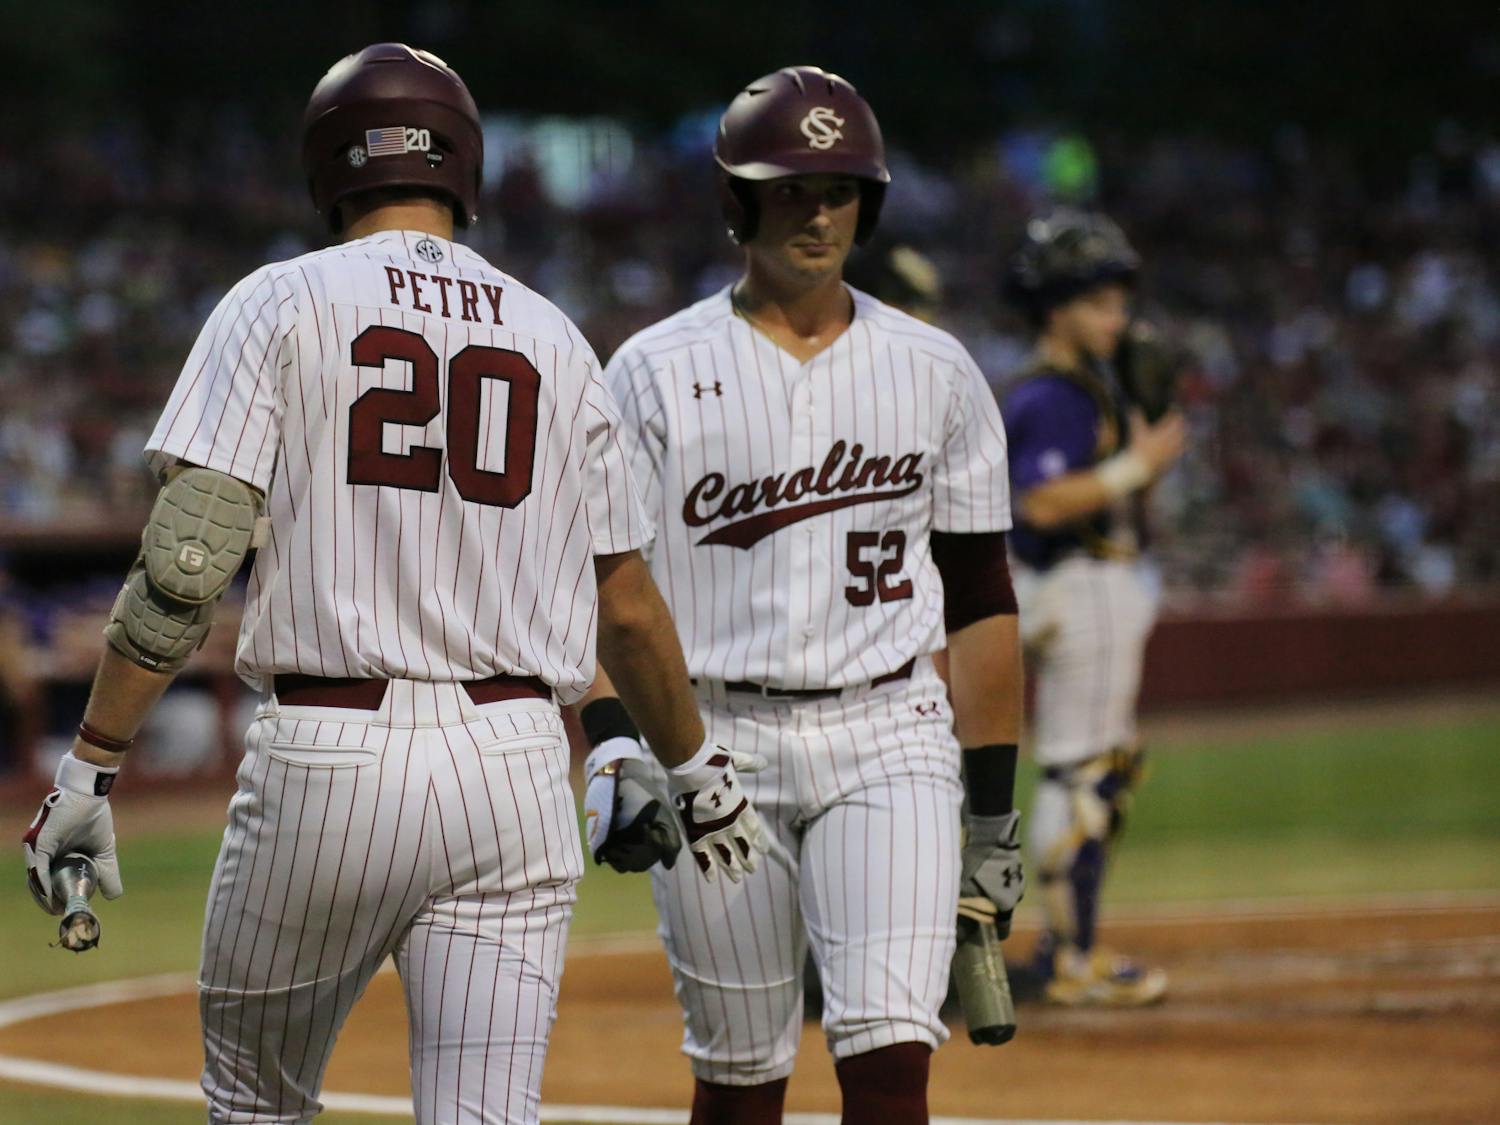 Freshman outfielder Ethan Petry high fives junior first baseman Gavin Casas as he walks up to the plate to hit for the Gamecocks. No. 6 South Carolina won the first game of a three-game series 13-5 against No. 1 LSU on April 6, 2023, at Founders Park.